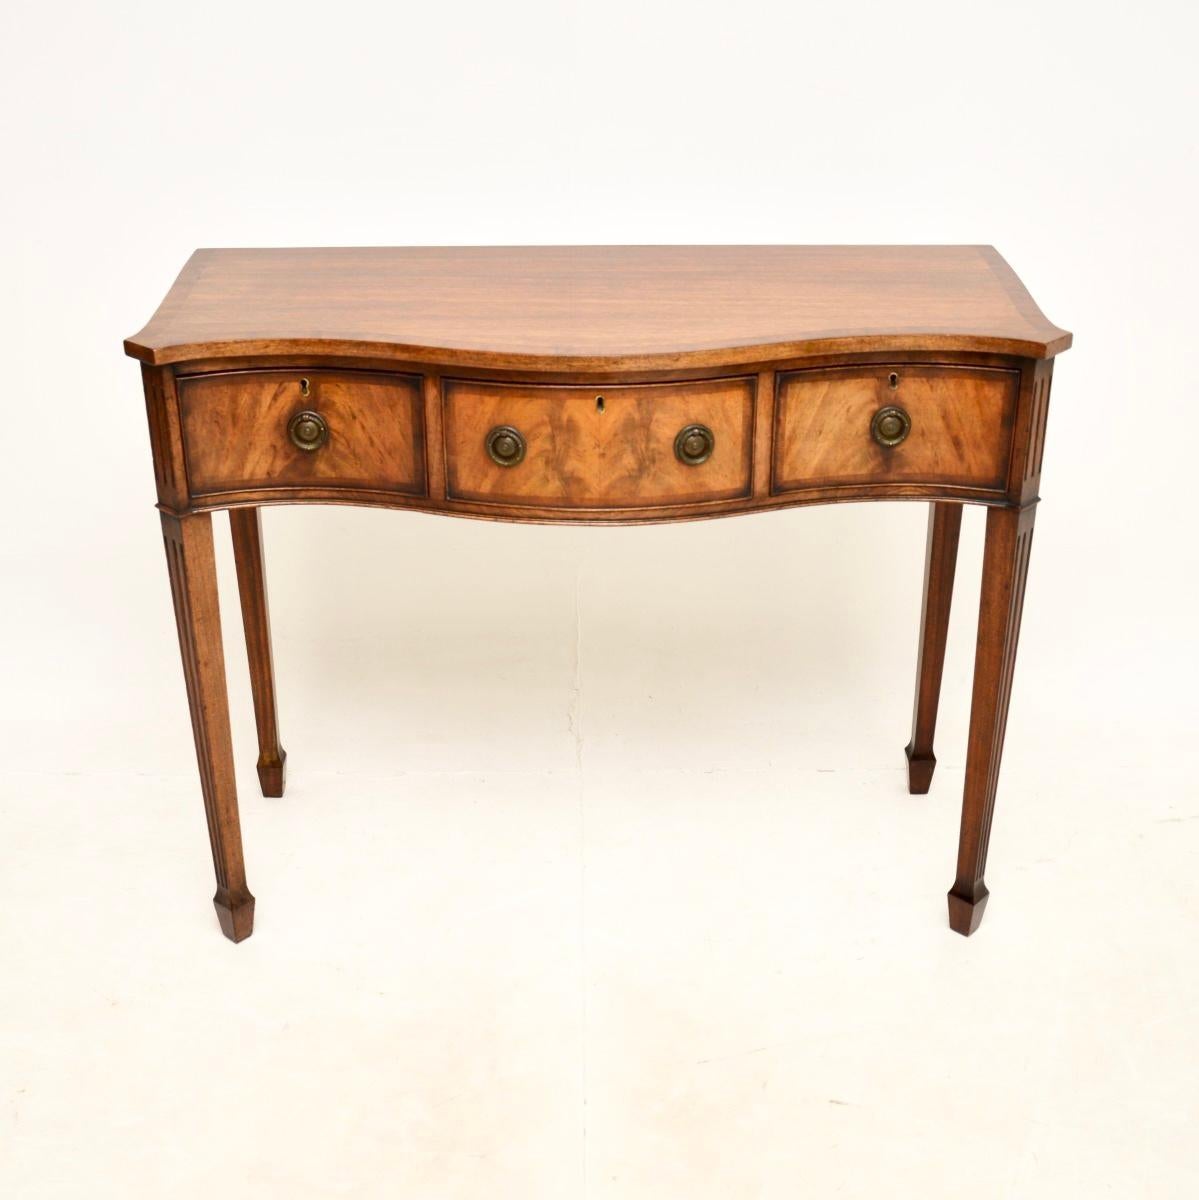 A lovely antique Edwardian console side table, made in England and dating from the 1900-1910 period.

This is of superb quality and is a great size, with some lovely design features. It has a serpentine shaped front and stands on tapered legs